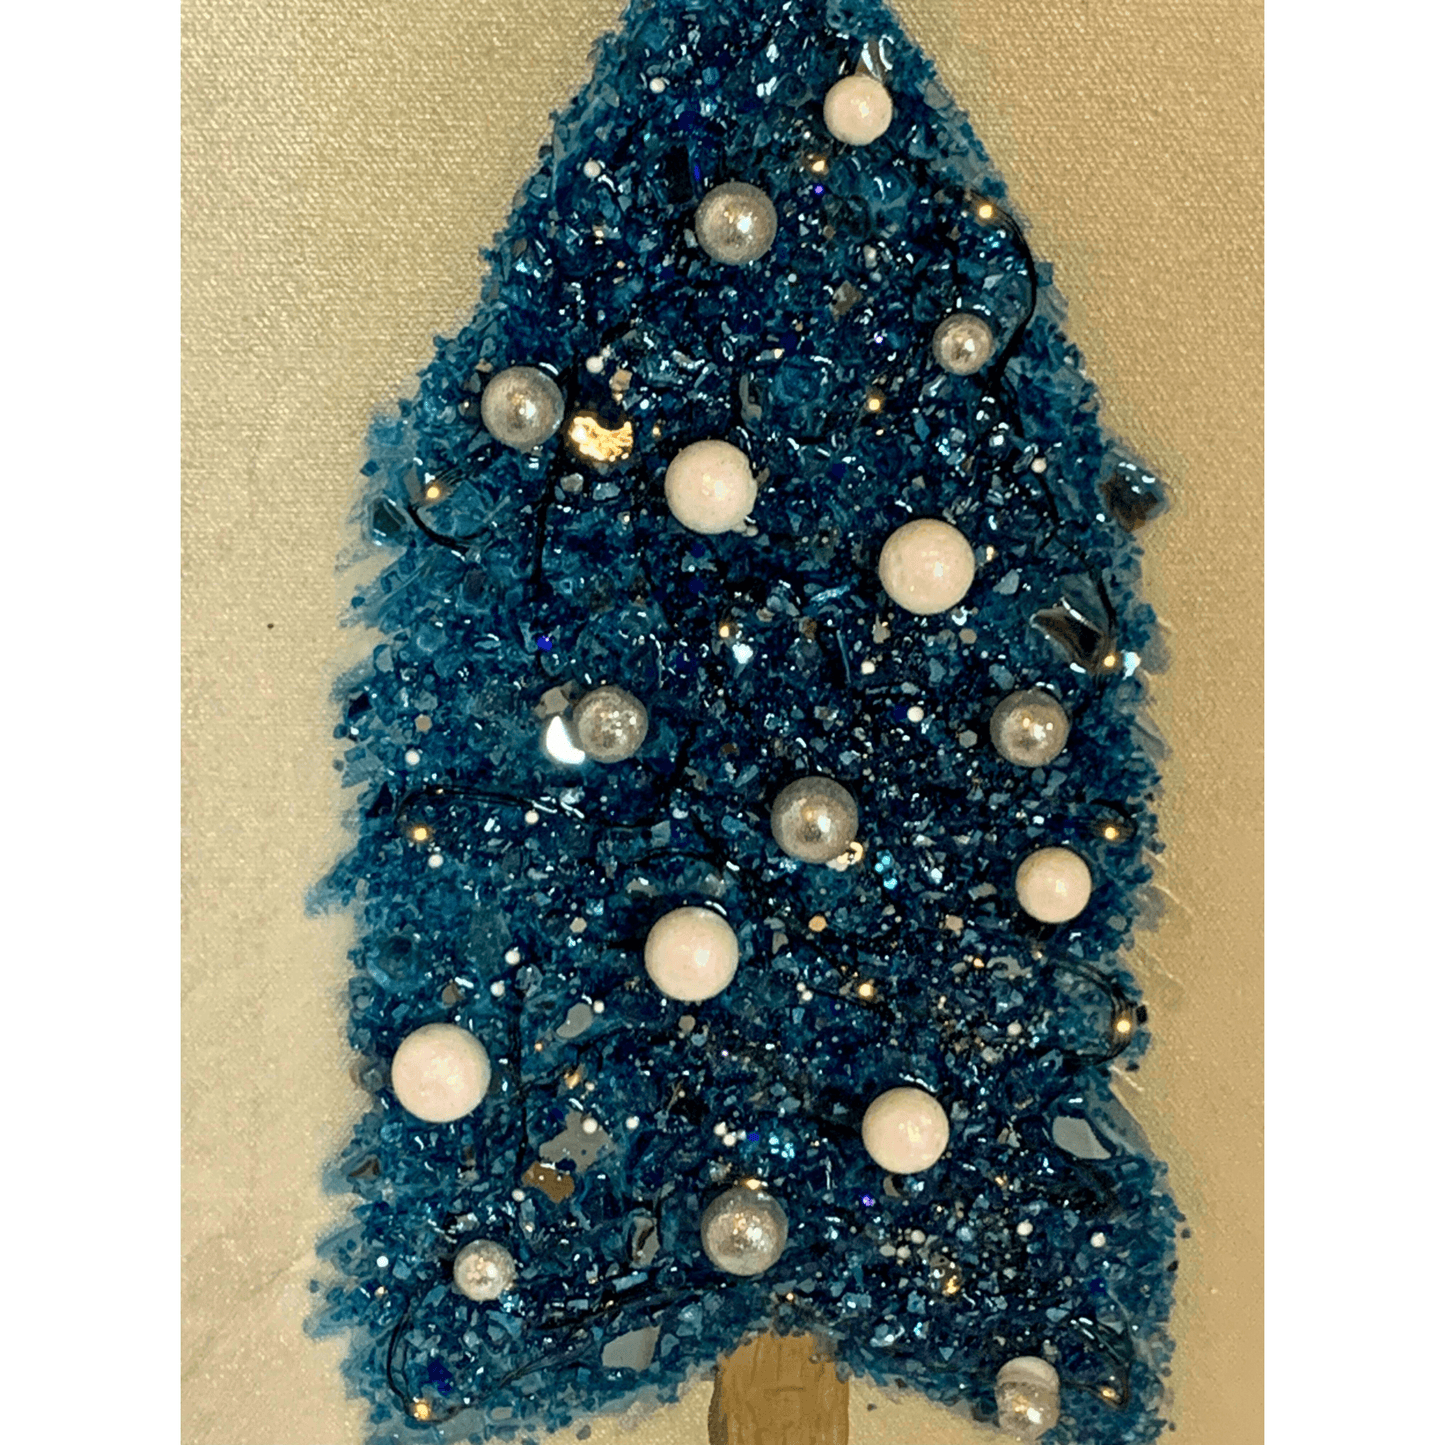 BLUE SILVER AND WHITE CHRISTMAS TREE Mixed Media Modern Art